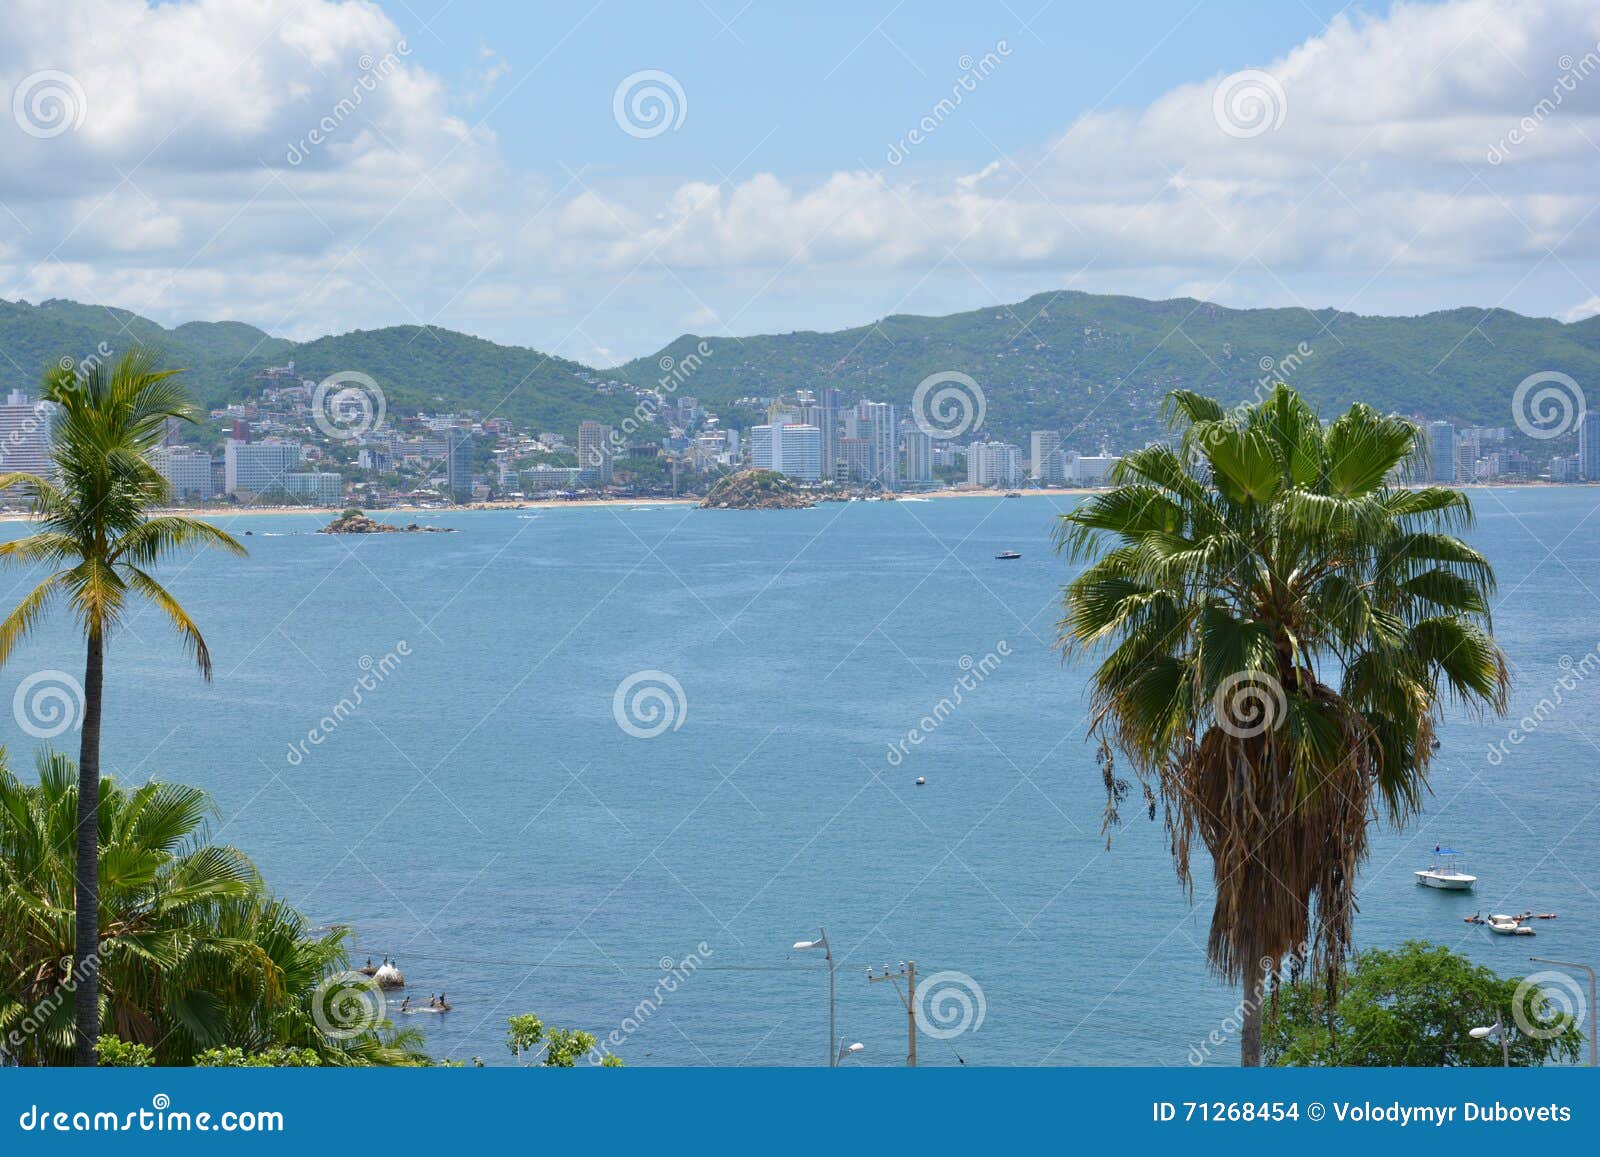 united mexican states, acapulco.